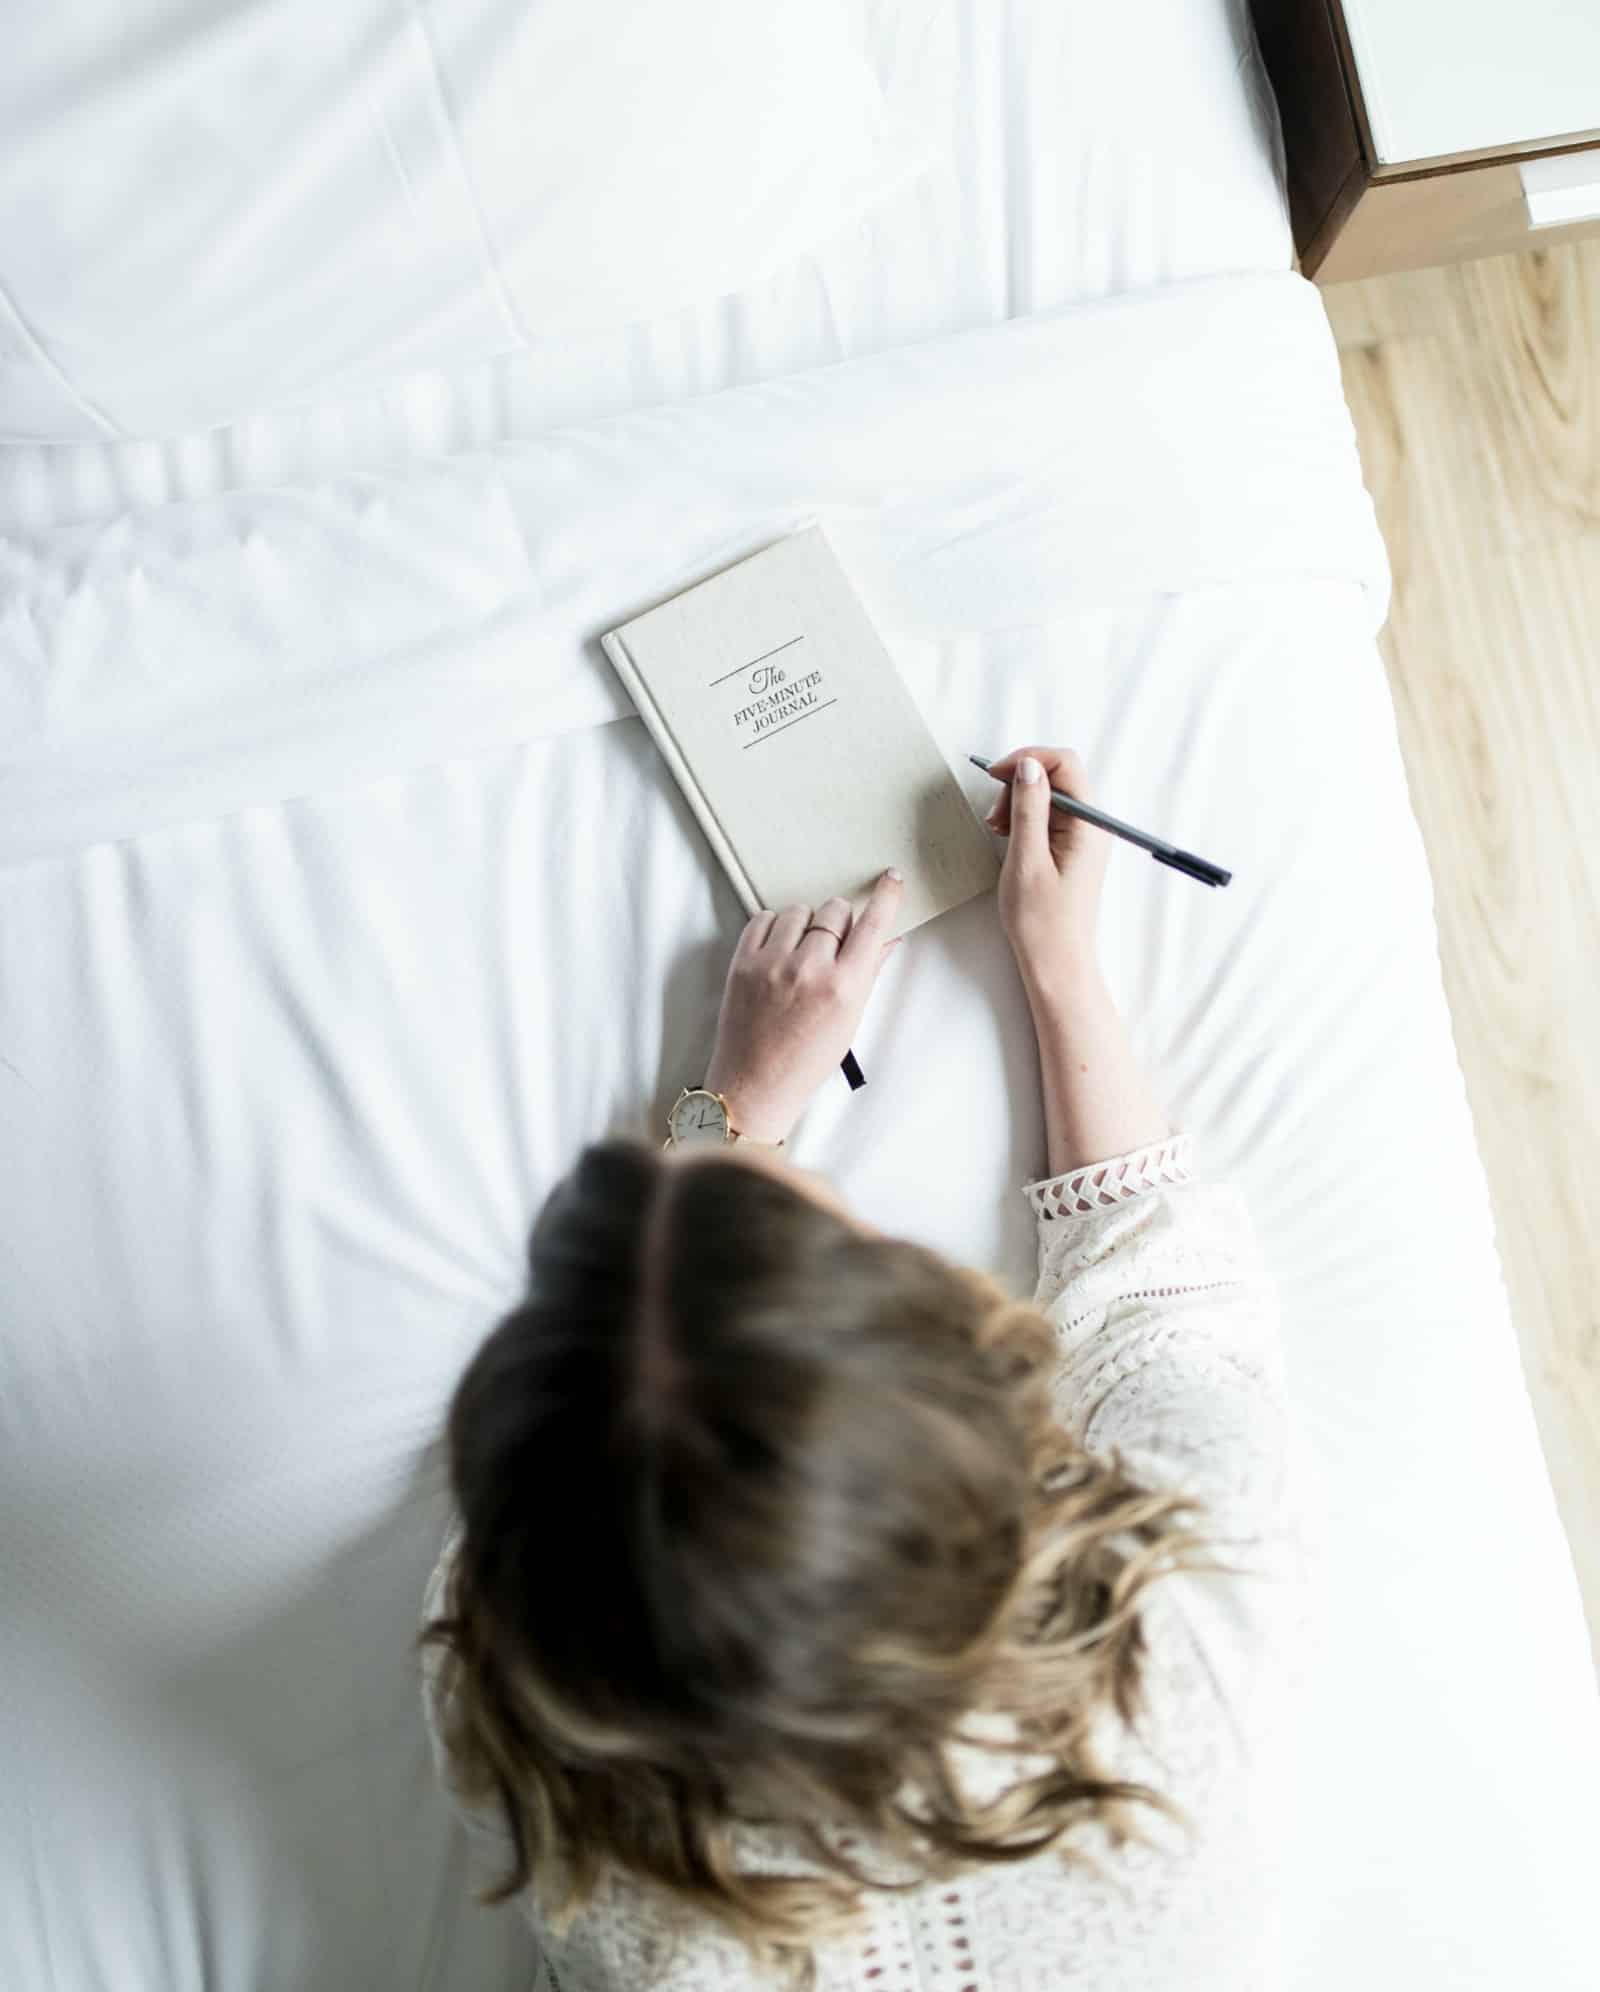 The Effects of Gratitude Journaling I How Practicing Gratitude Daily Made Me More Self-Aware